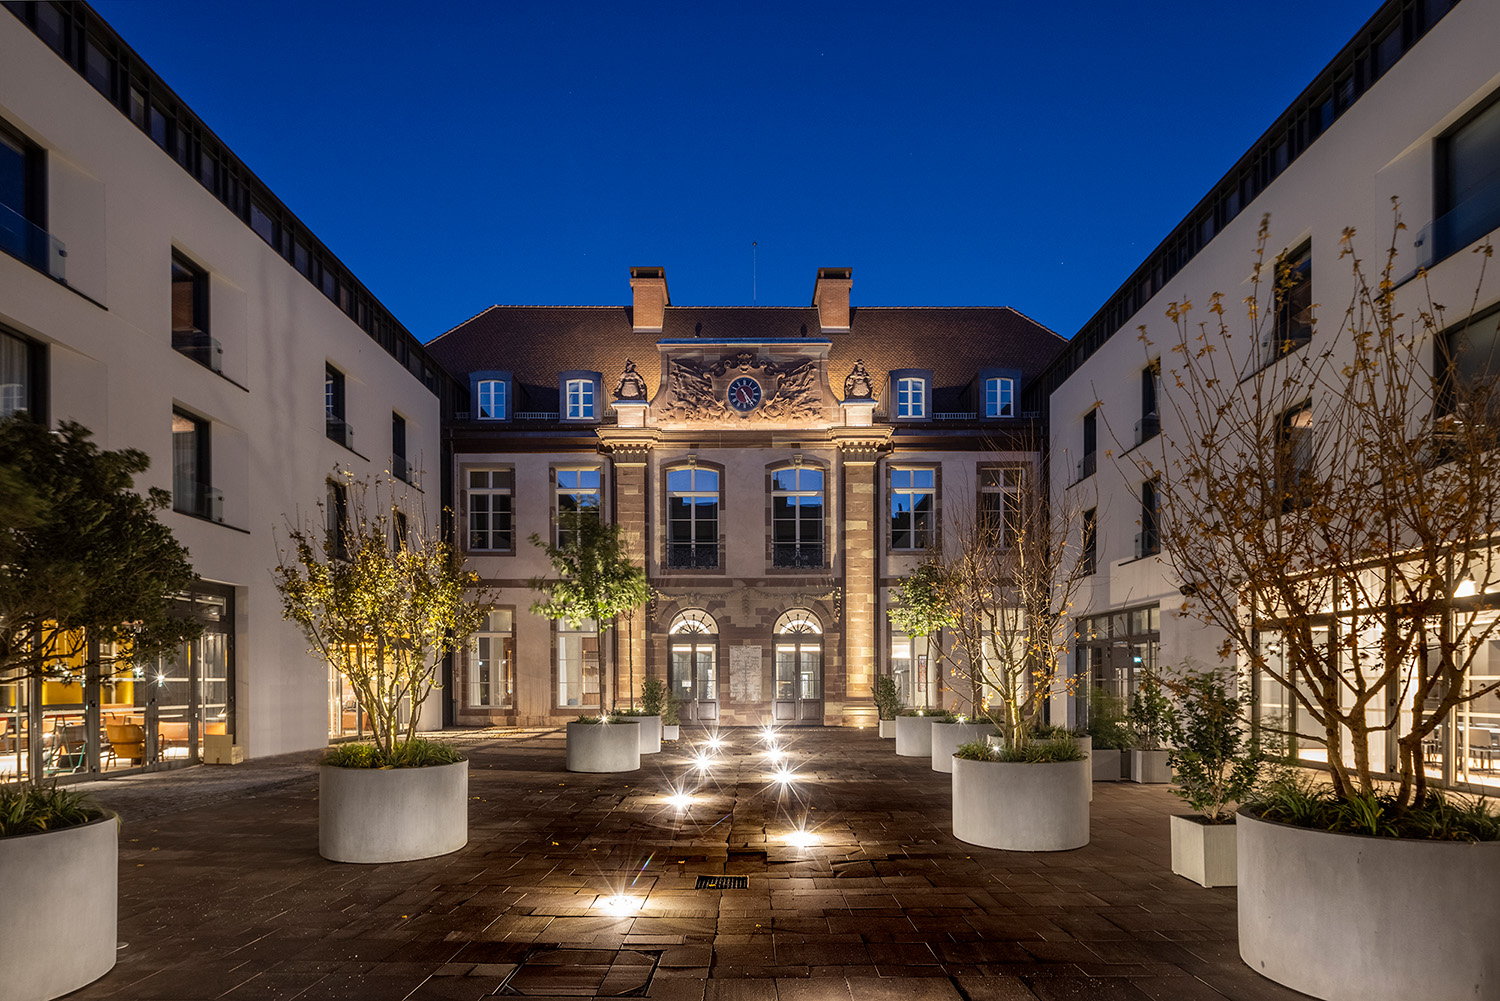 Interior courtyard of the hotel leonor strasbourg, france, luxury lifestyle hotel designed by the interior design studio jean-philippe nuel, renovation, rehabilitation, interior design, 4 star hotel